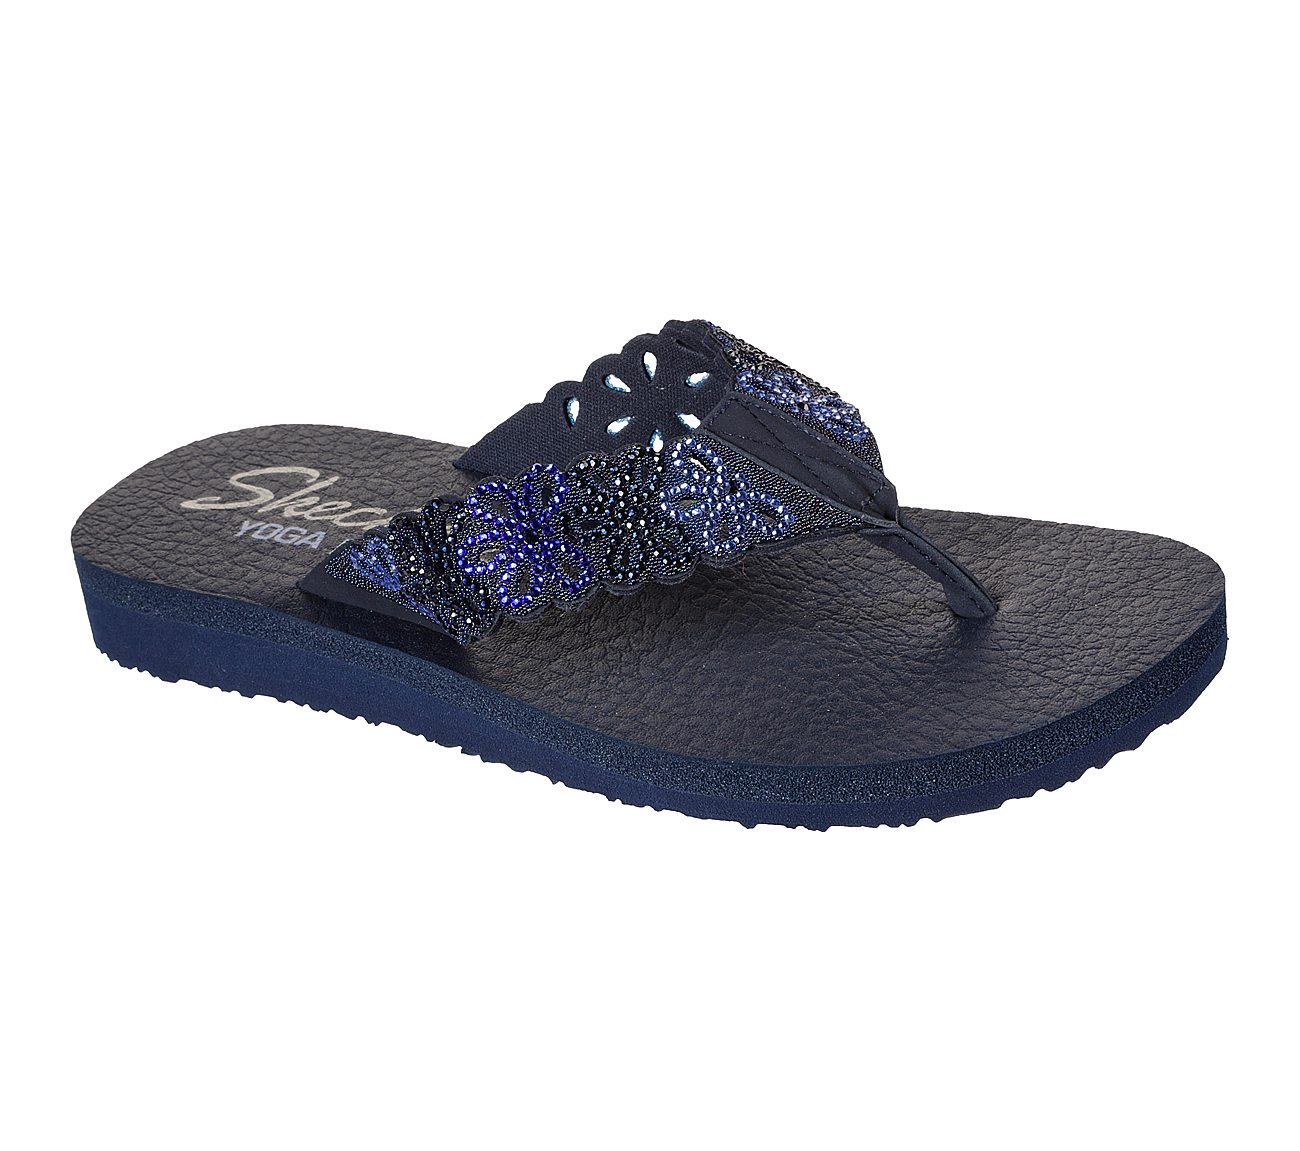 MEDITATION - SIMPLE FLORAL, NAVY/BLUE Footwear Lateral View